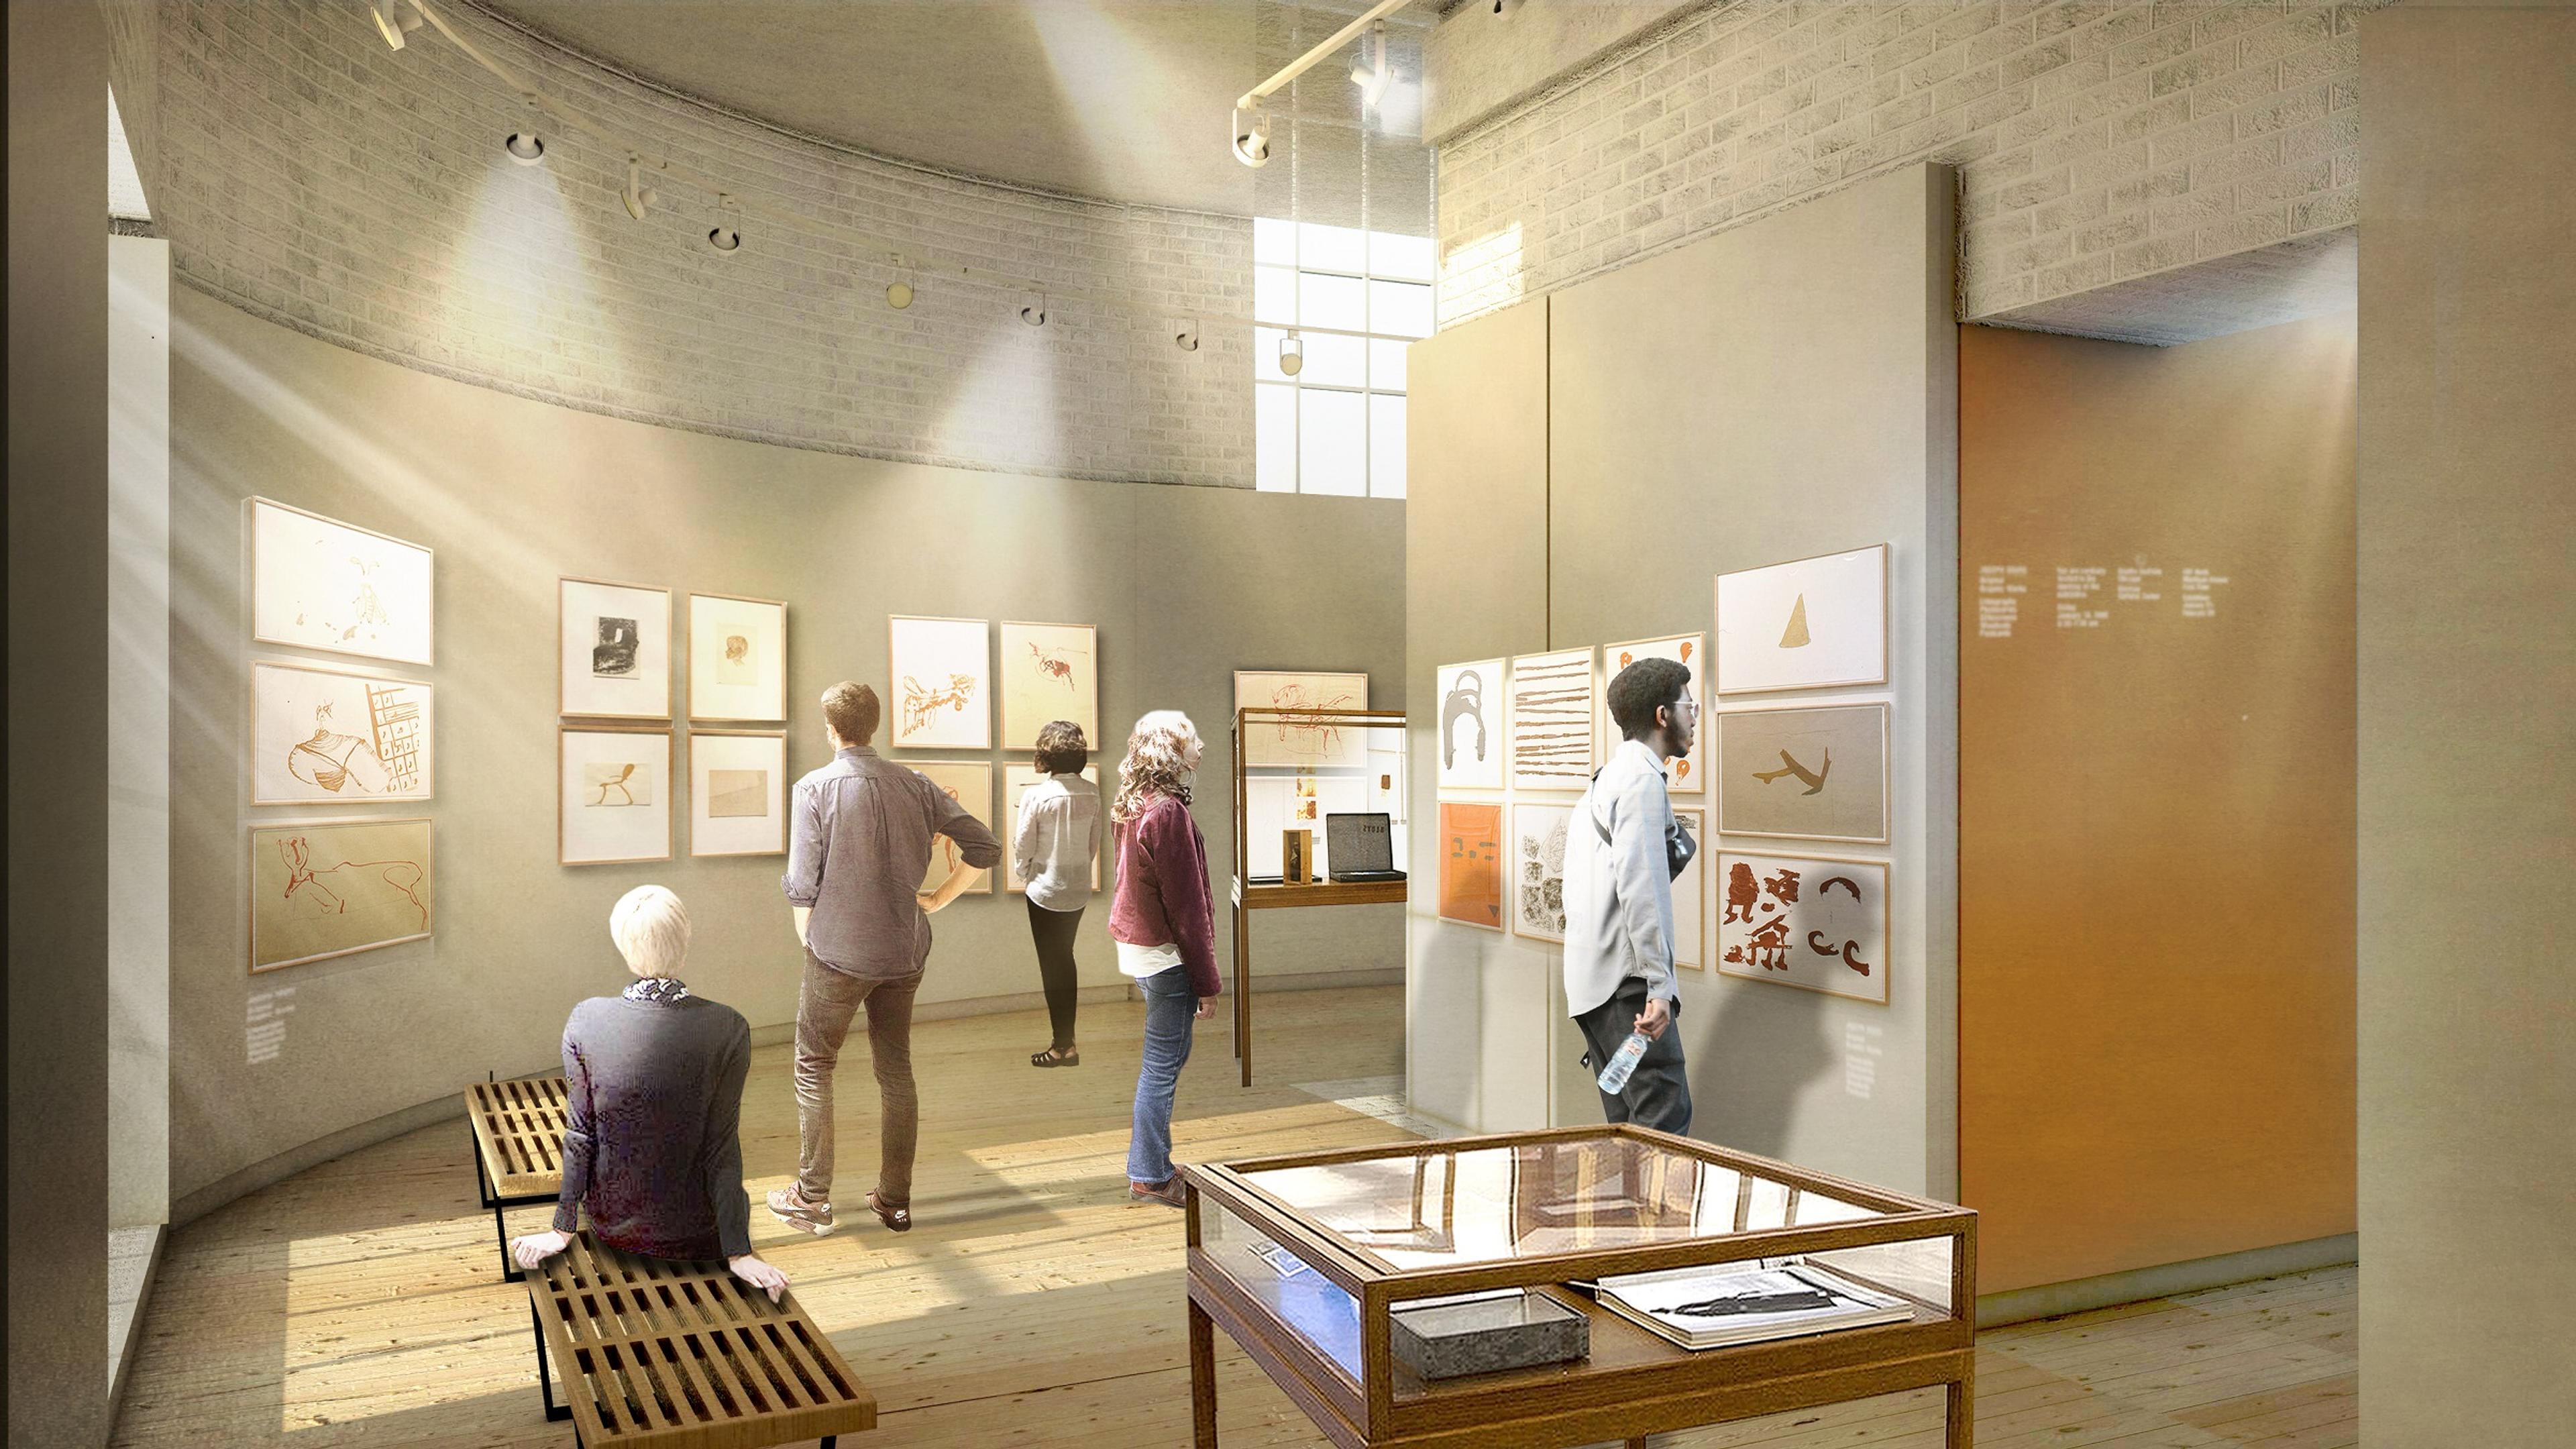 Rendering of people looking at framed artwork in an exhibition gallery